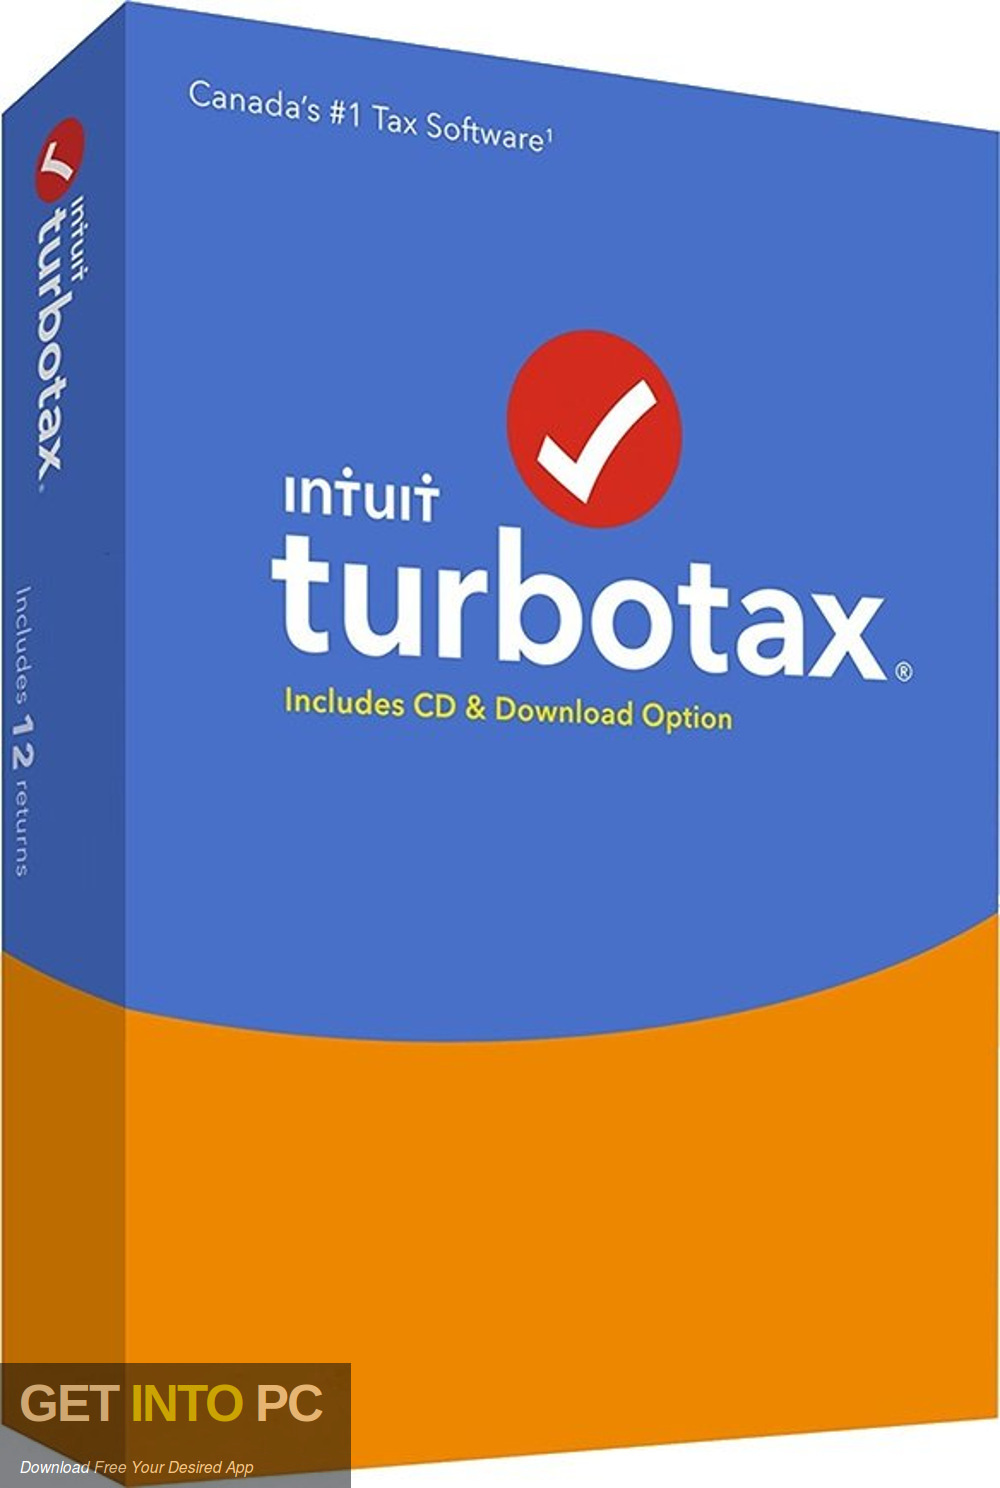 Download turbo tax free 3gp to avi converter free download for windows xp